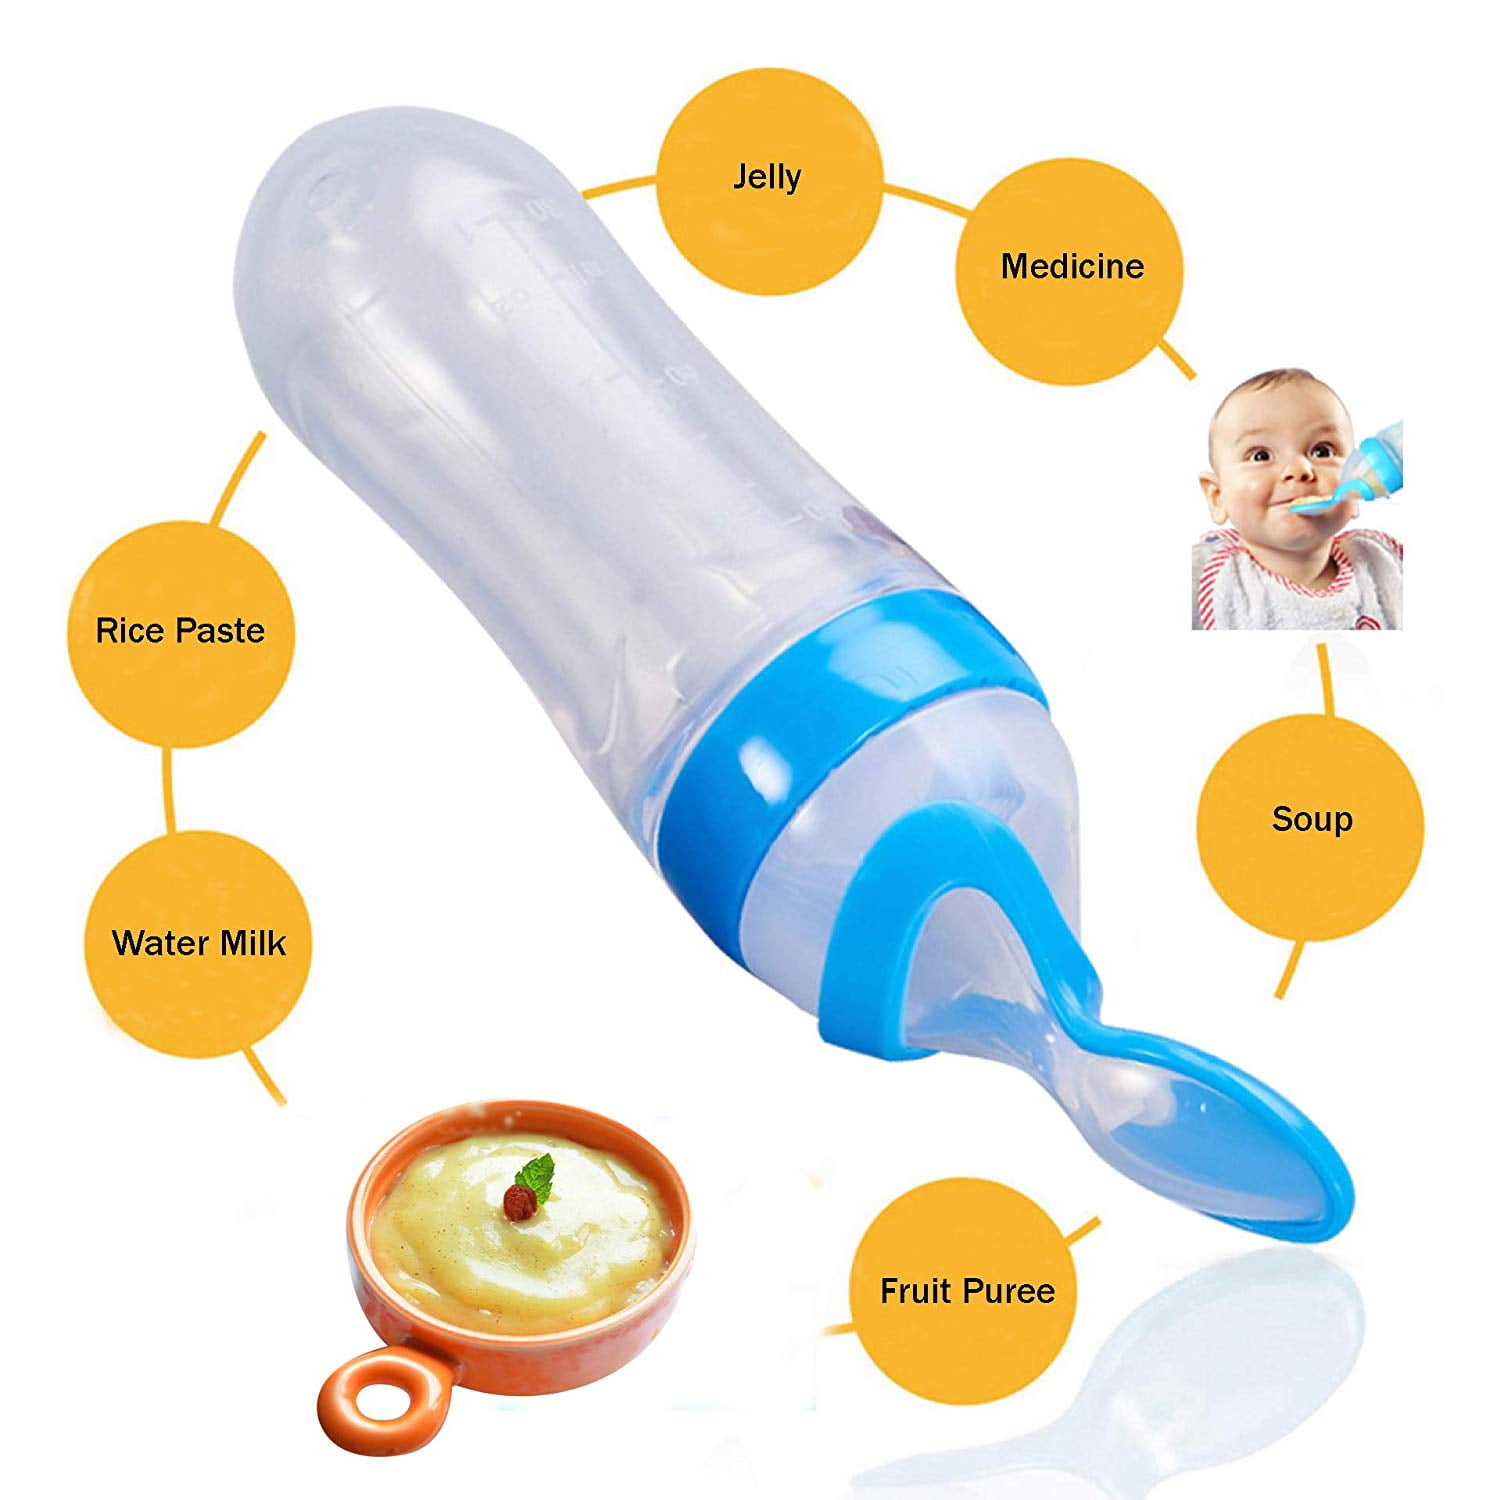 Silicone Baby Food Feeder Set Newborn Nibbler Pacifier Feeding Bottle  Squeeze Feeder for Infant Food Dispensing